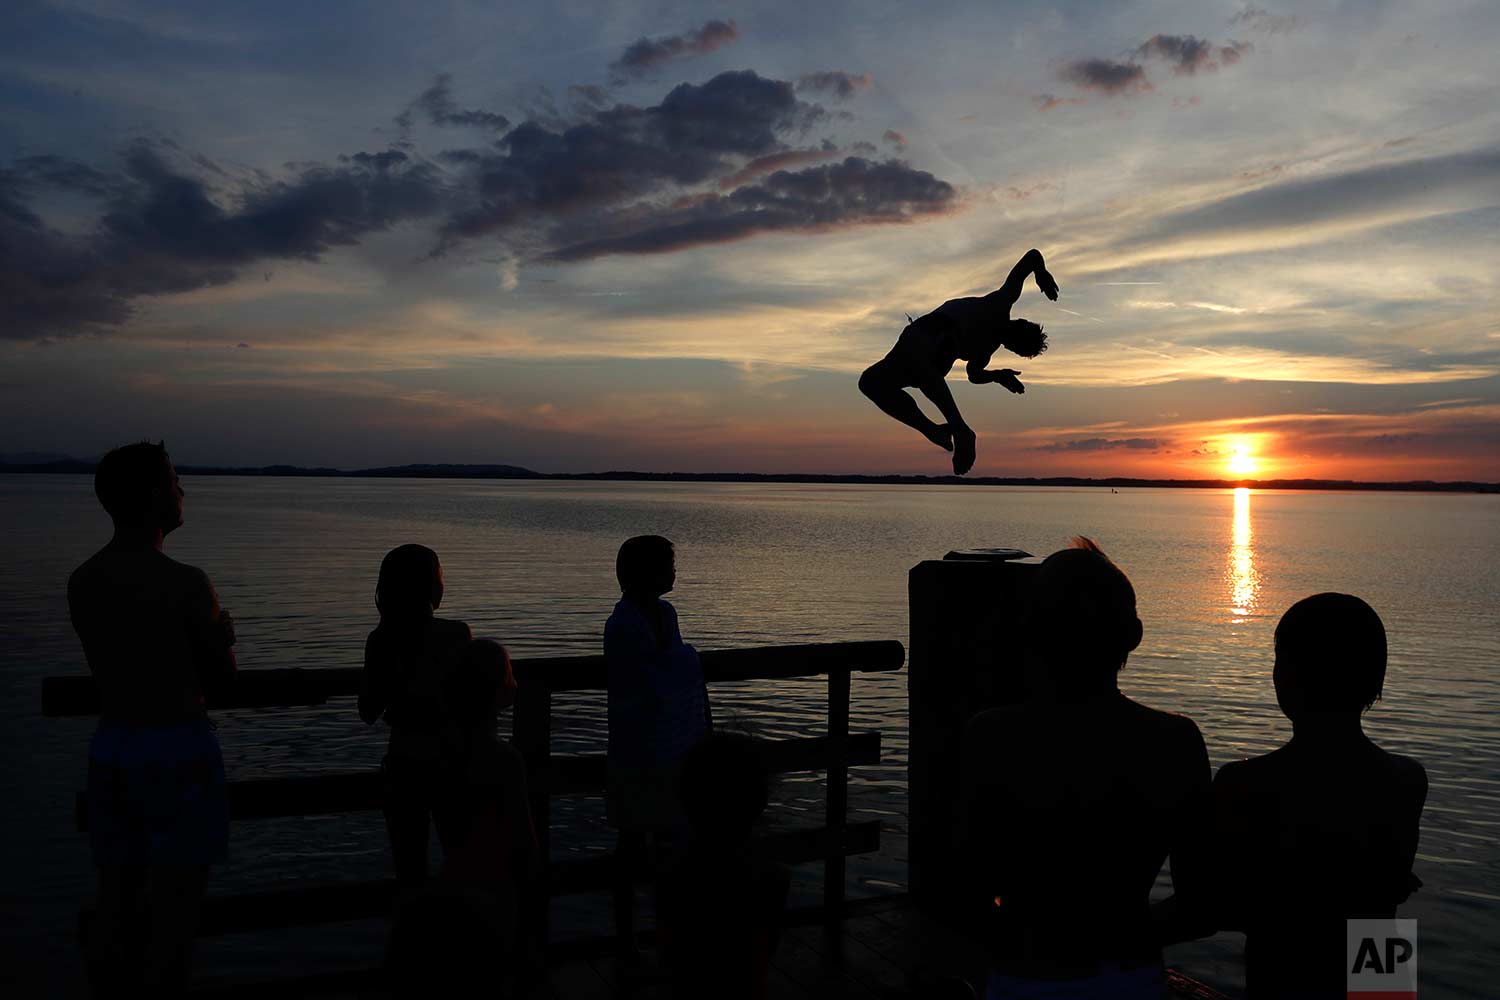  In this Saturday, July 22, 2017 photo, a man jumps into the water surrounded by his family at lake 'Chiemsee' in Chieming, Germany. (AP Photo/Matthias Schrader) 